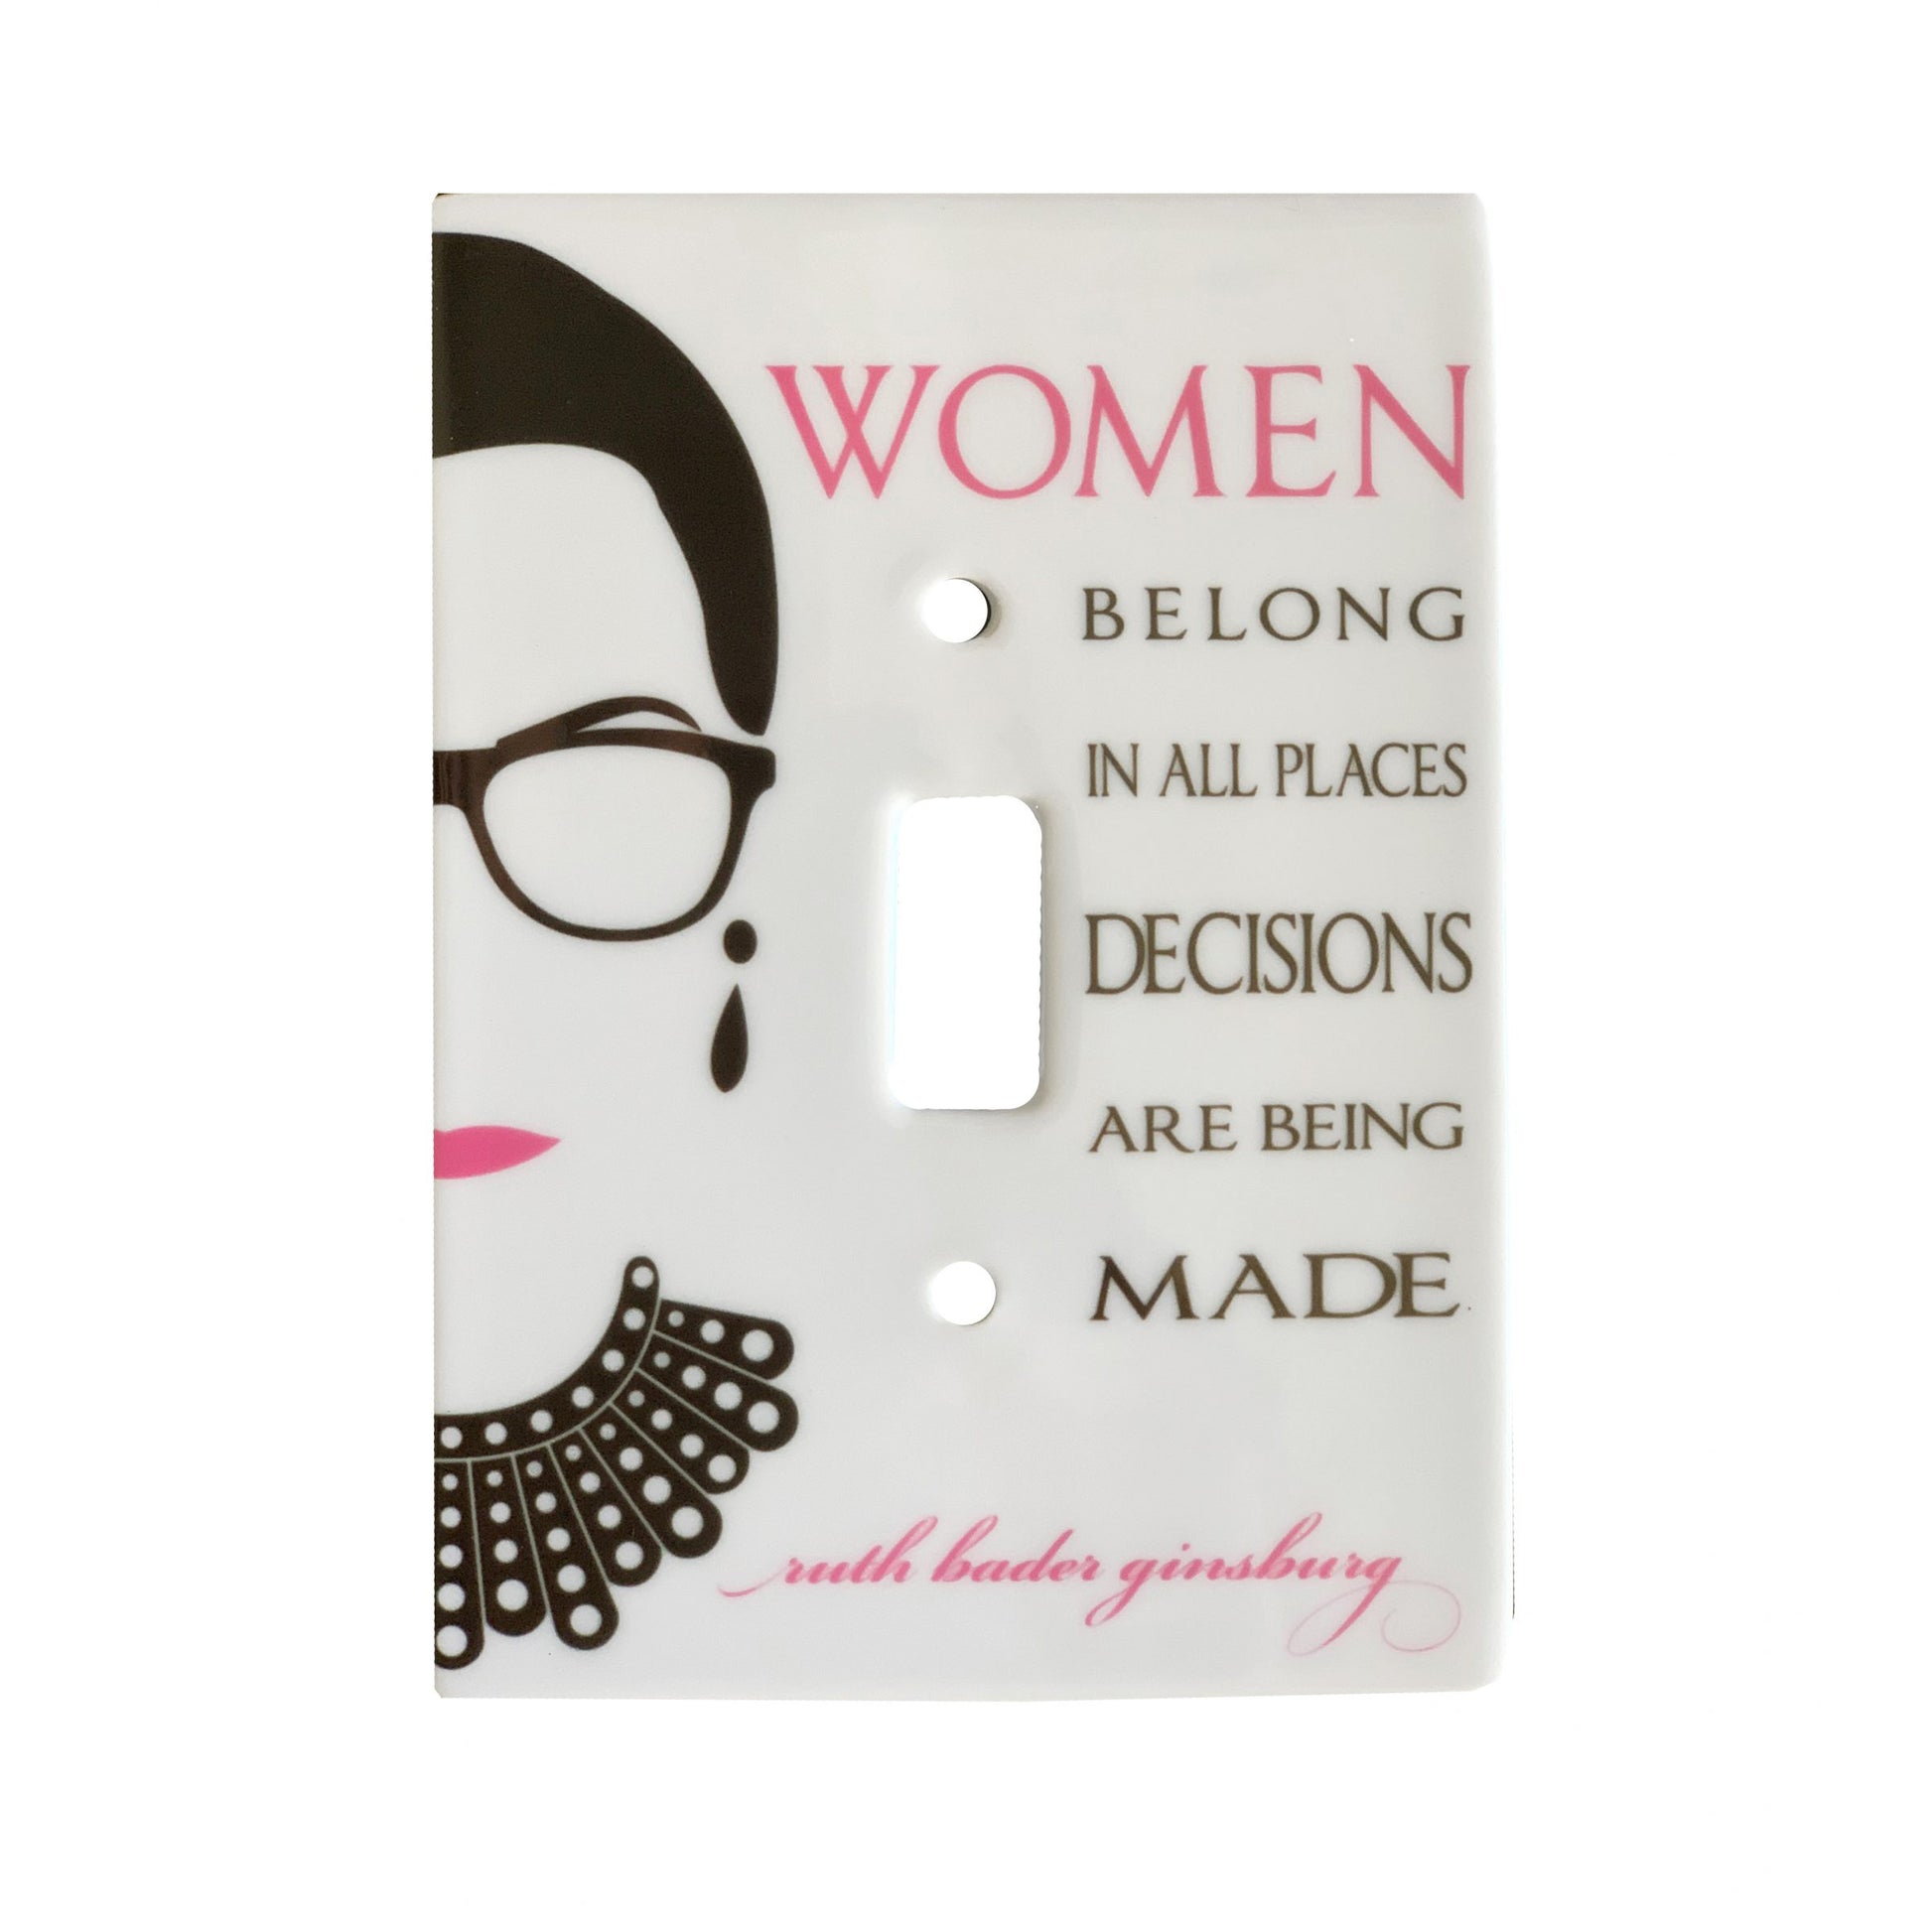 ceramic single toggle switch plate featuring the silhouette of ruth bader ginsburg and text that reads "women belong in all places decisions are being made".